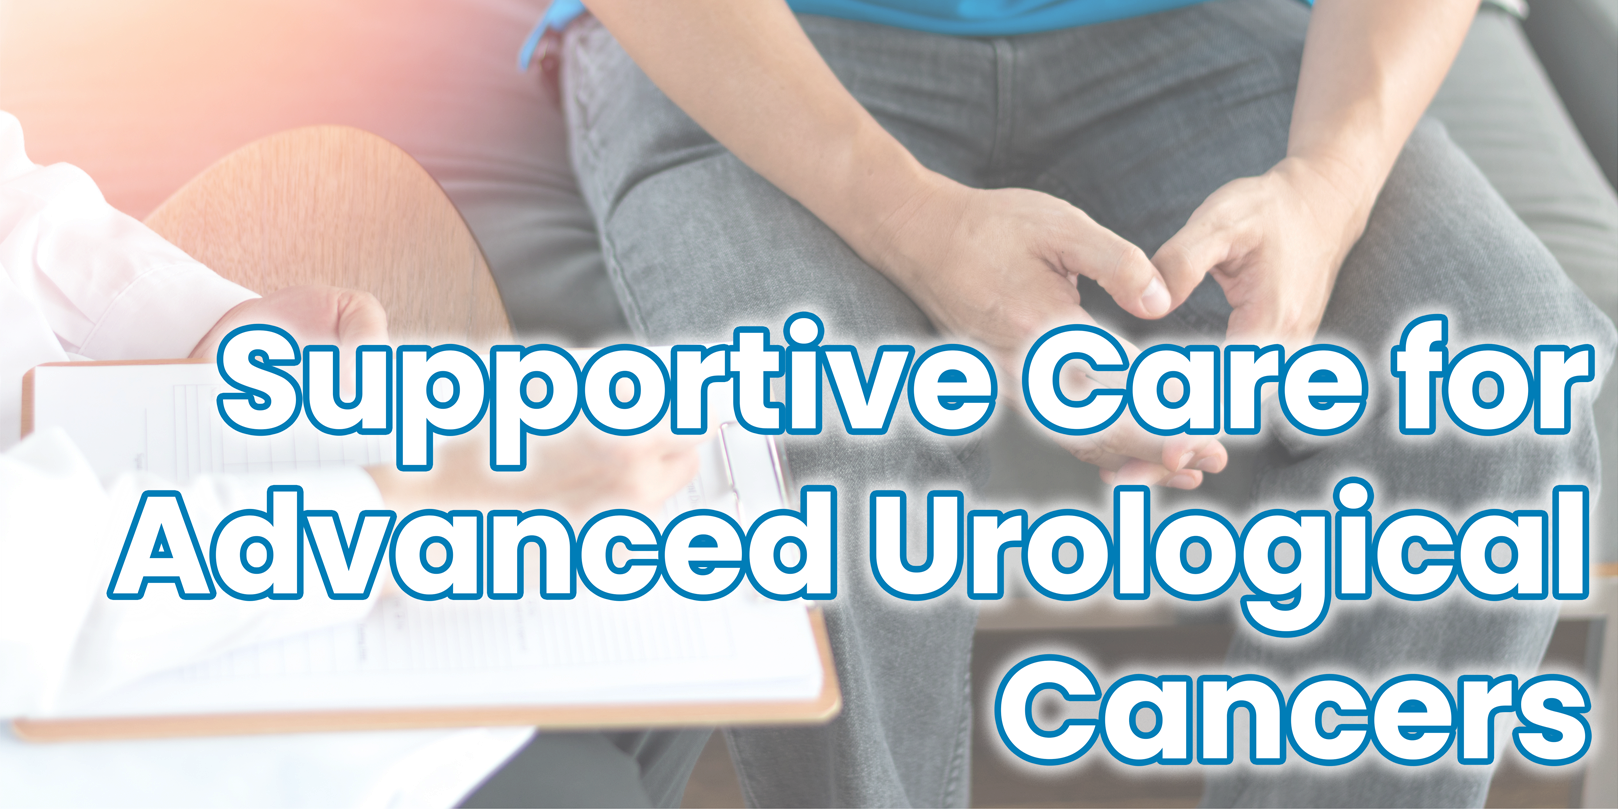 thumbnails Supportive Care for Advanced Urological Cancers